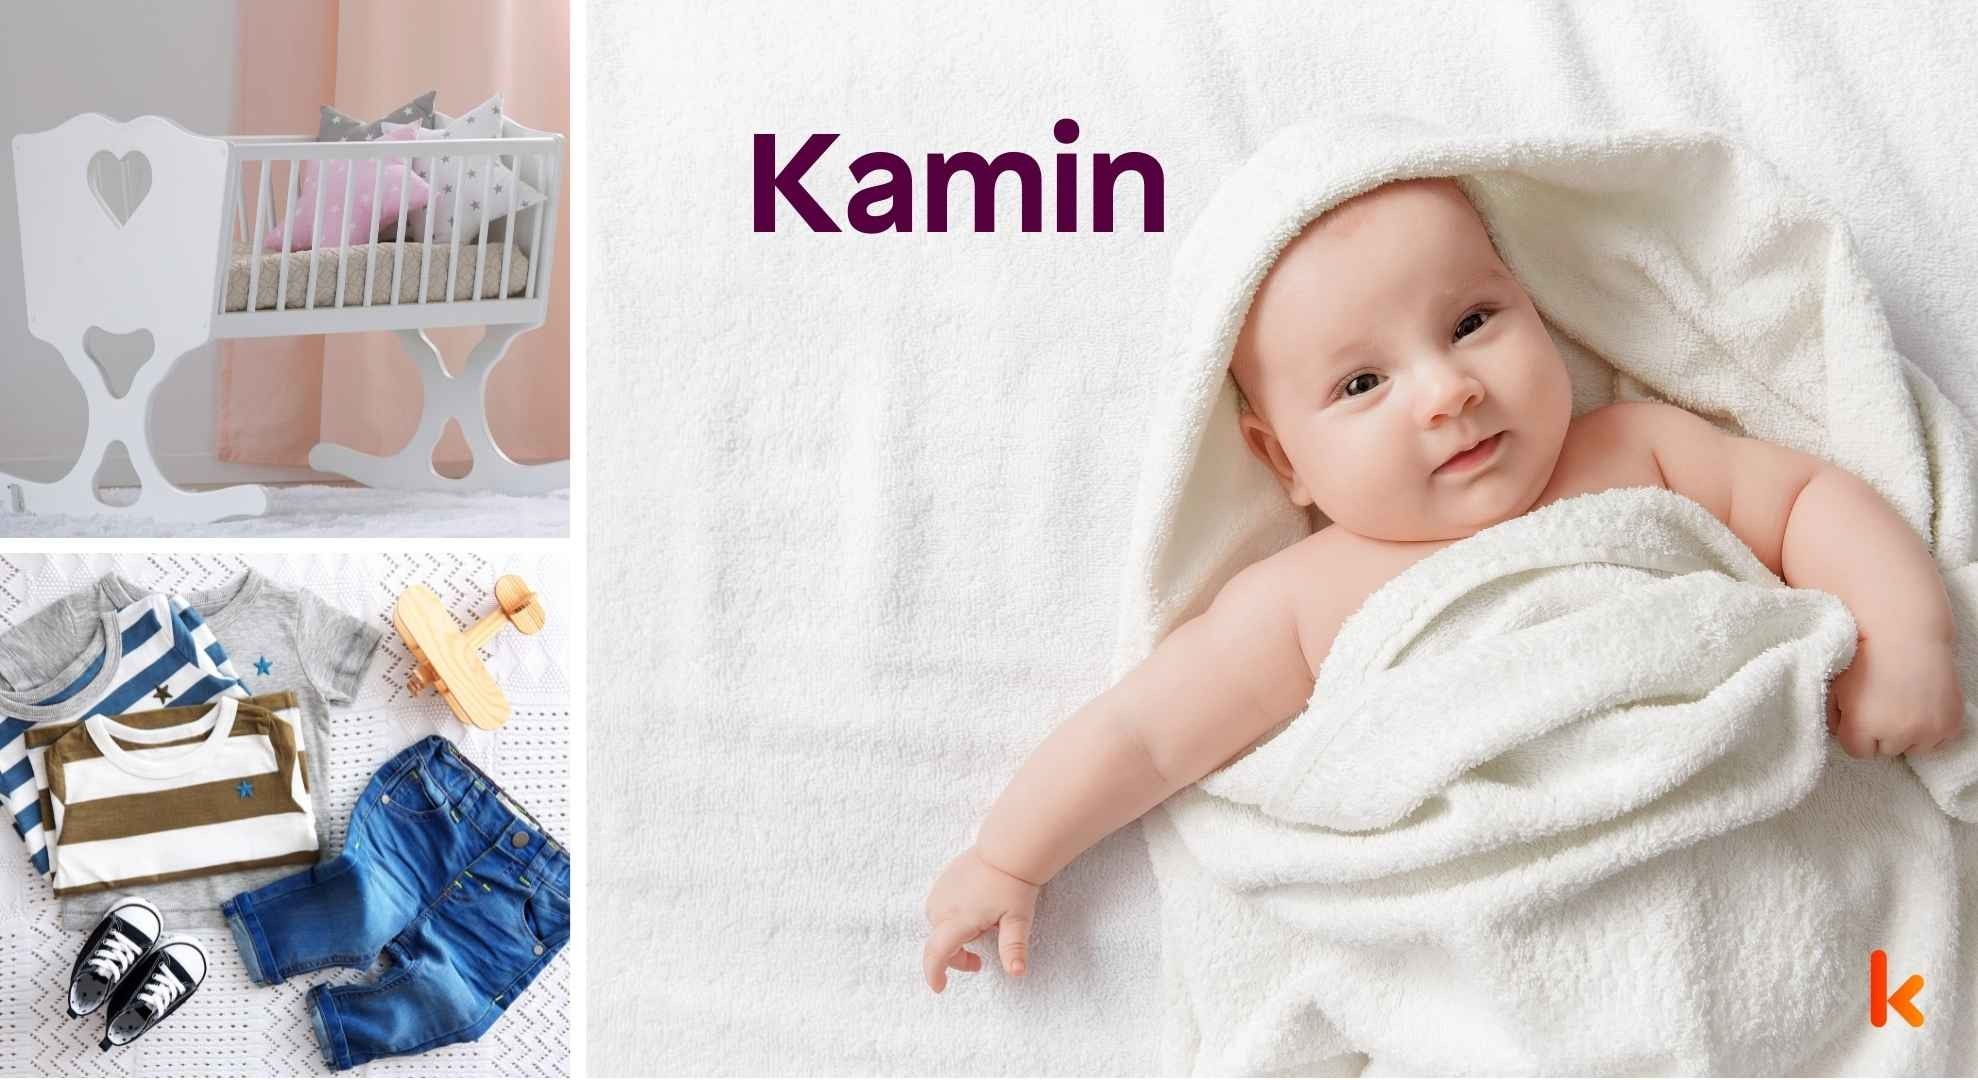 Meaning of the name Kamin